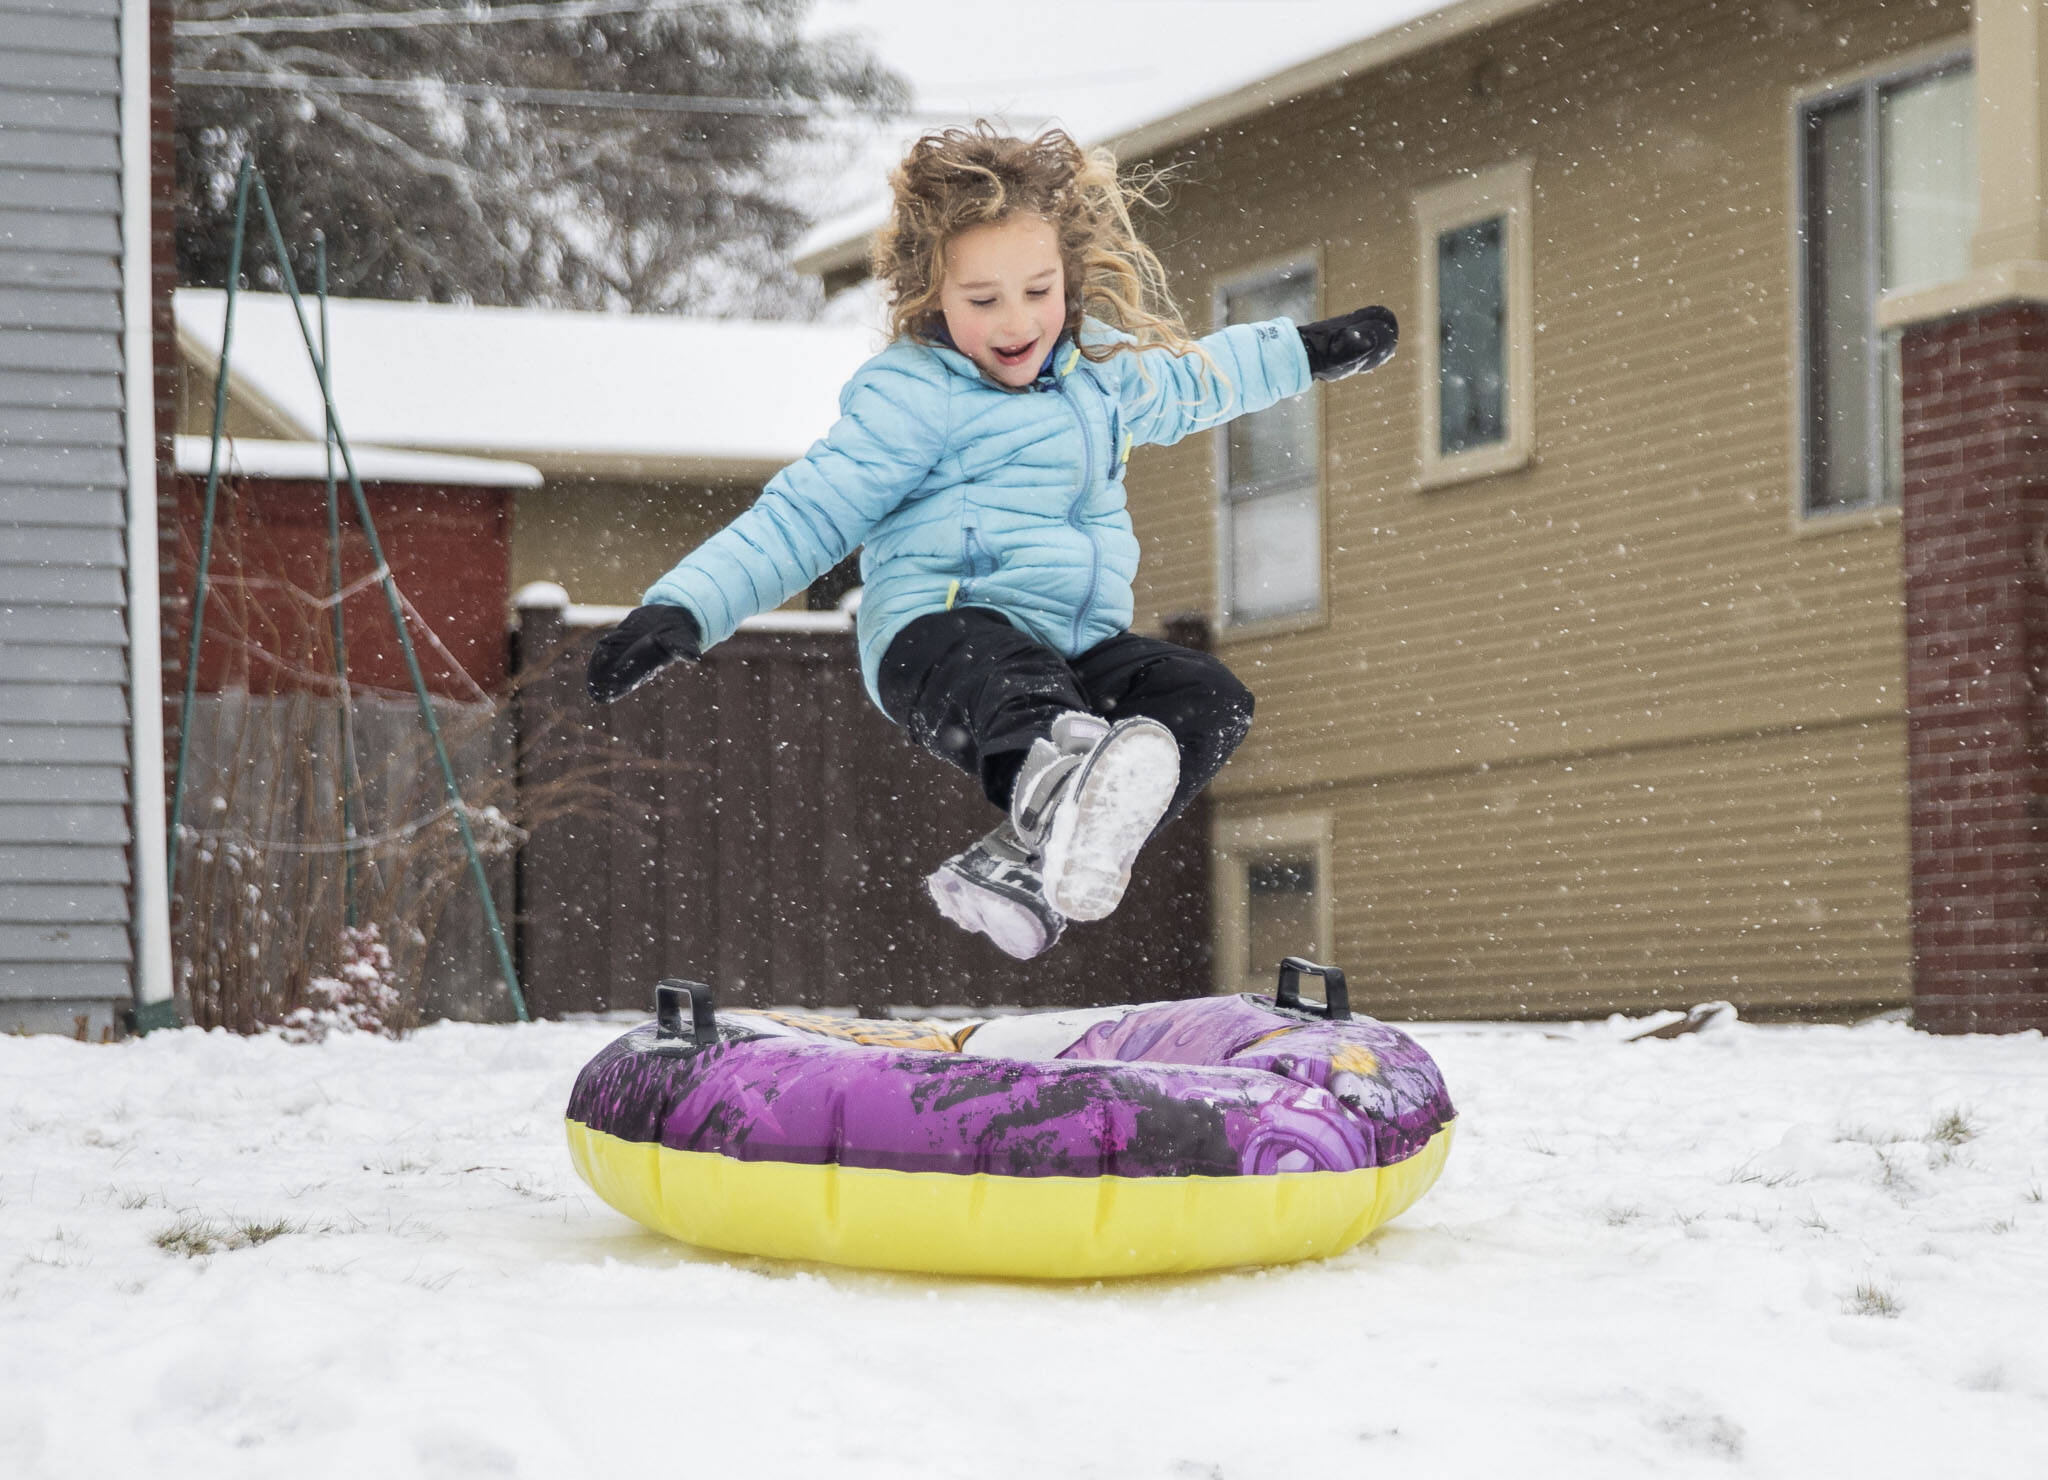 Halle Lucas-Roberts, 6, leaps onto her tube while sledding in front of her home on Tuesday, in Everett. (Olivia Vanni / The Herald)